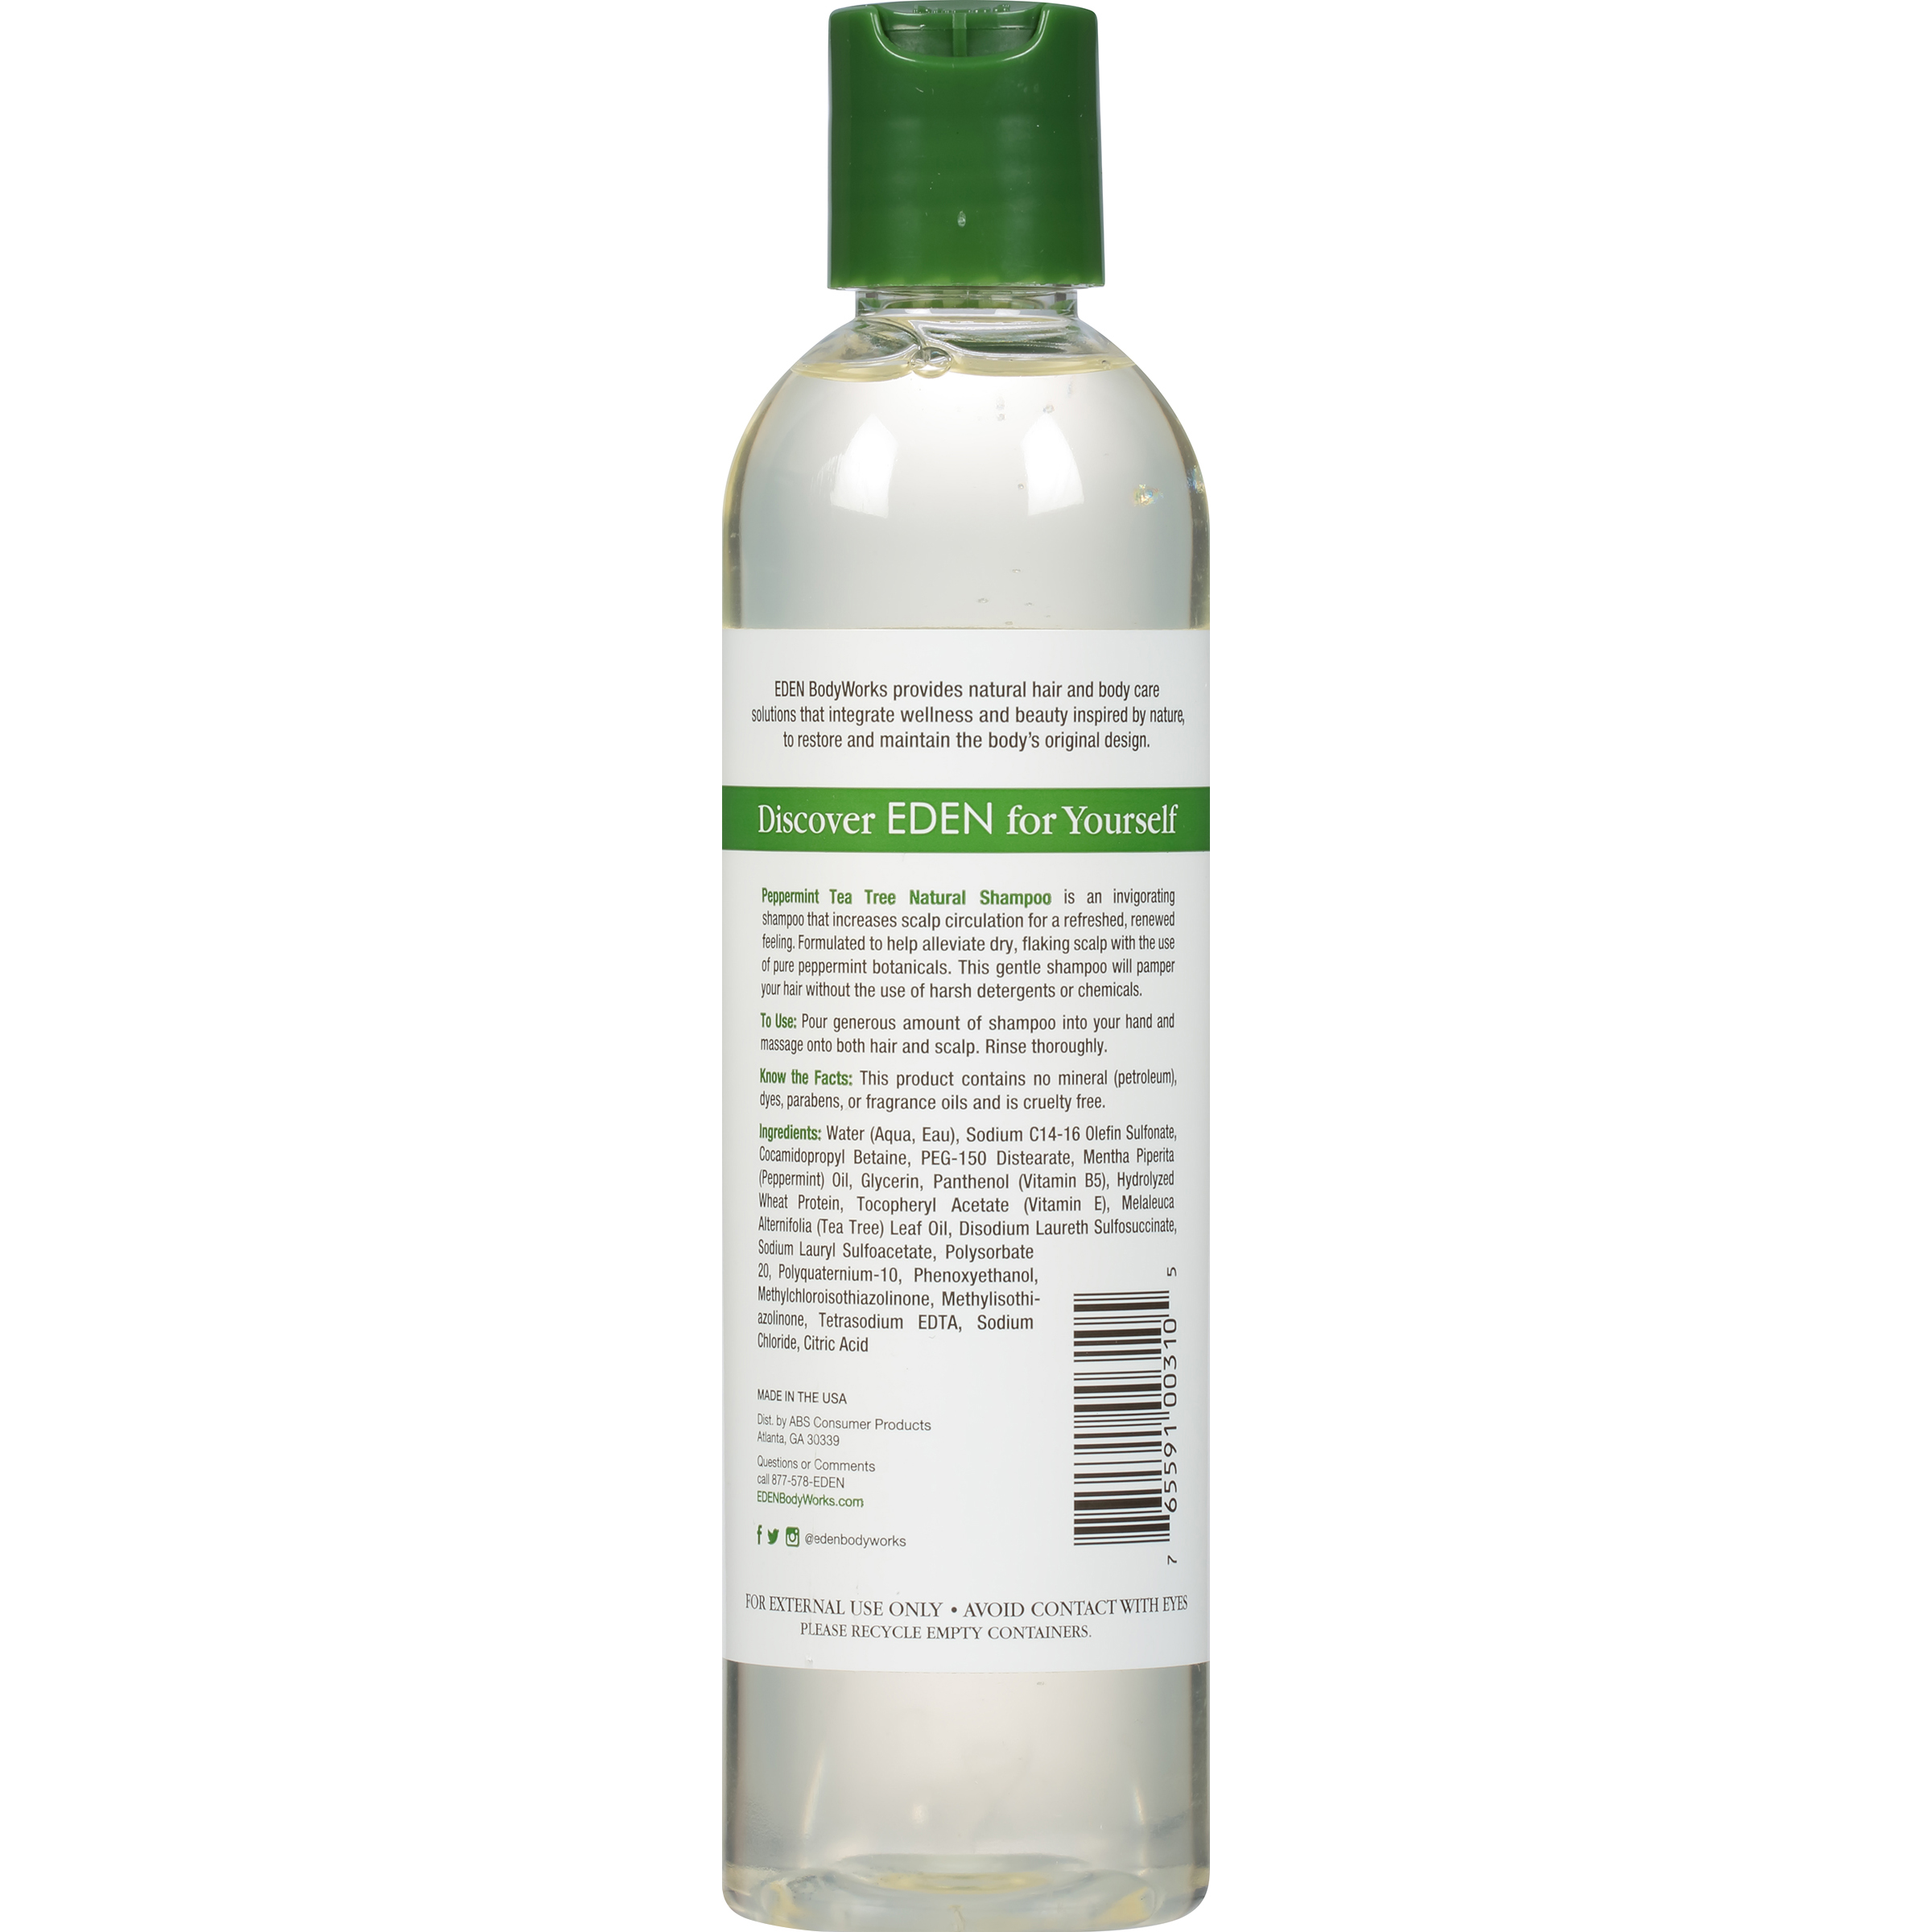 Eden BodyWorks Natural Clarifying Daily Shampoo with Peppermint & Tea Tree, 8 fl oz - image 3 of 7